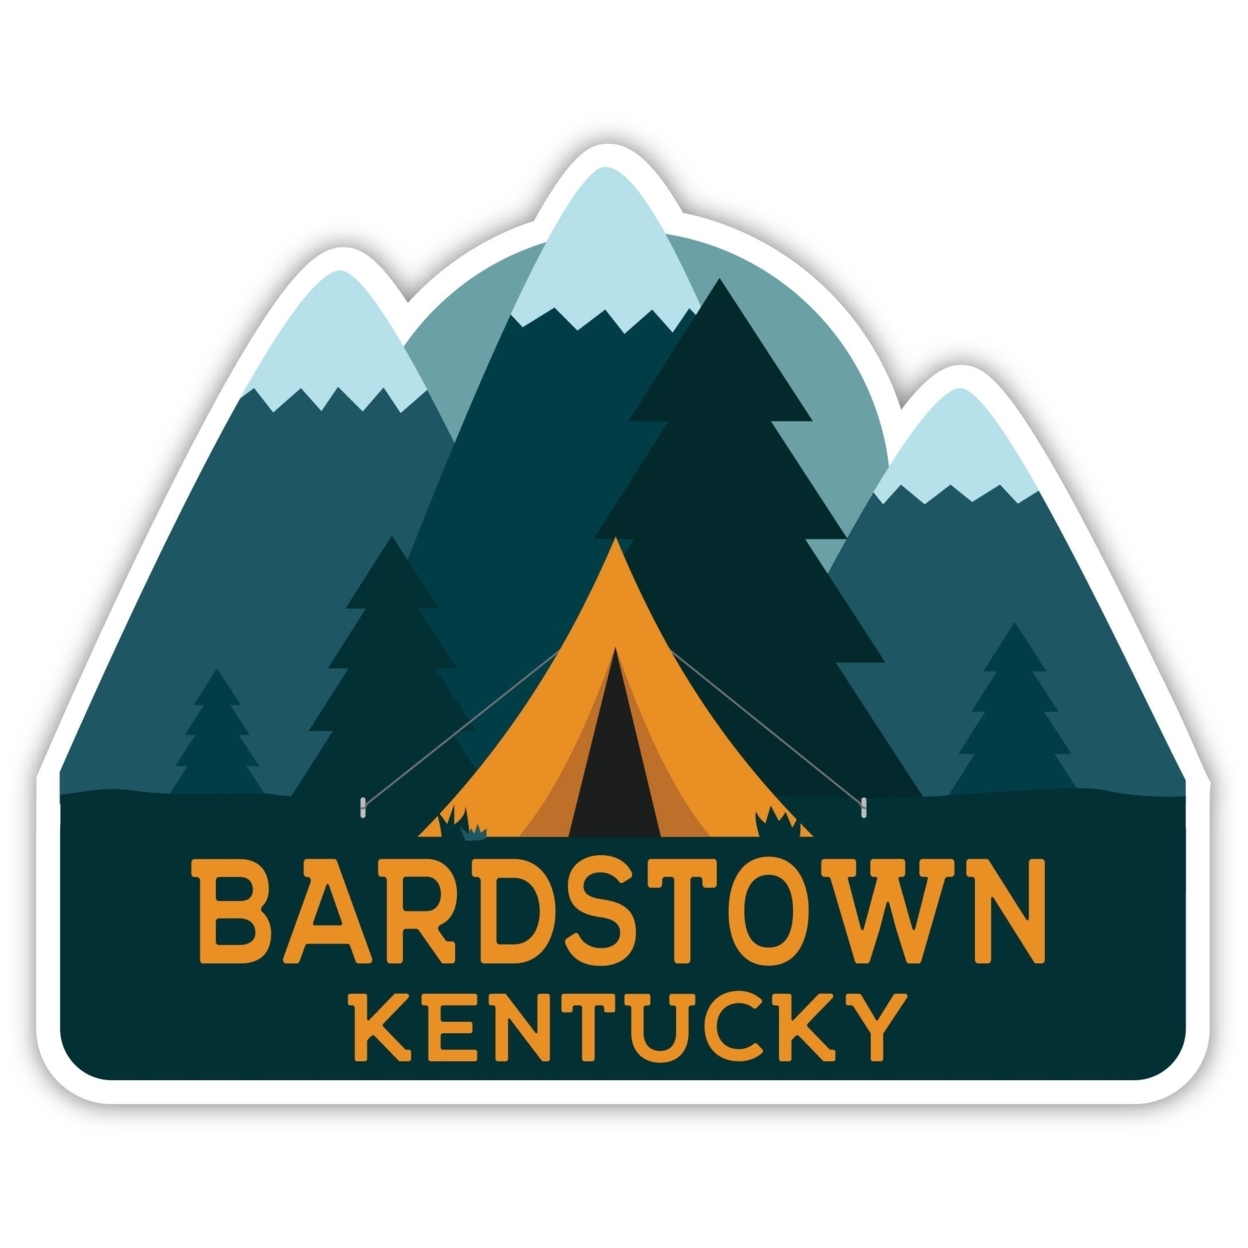 Bardstown Kentucky Souvenir Decorative Stickers (Choose Theme And Size) - 4-Pack, 2-Inch, Tent